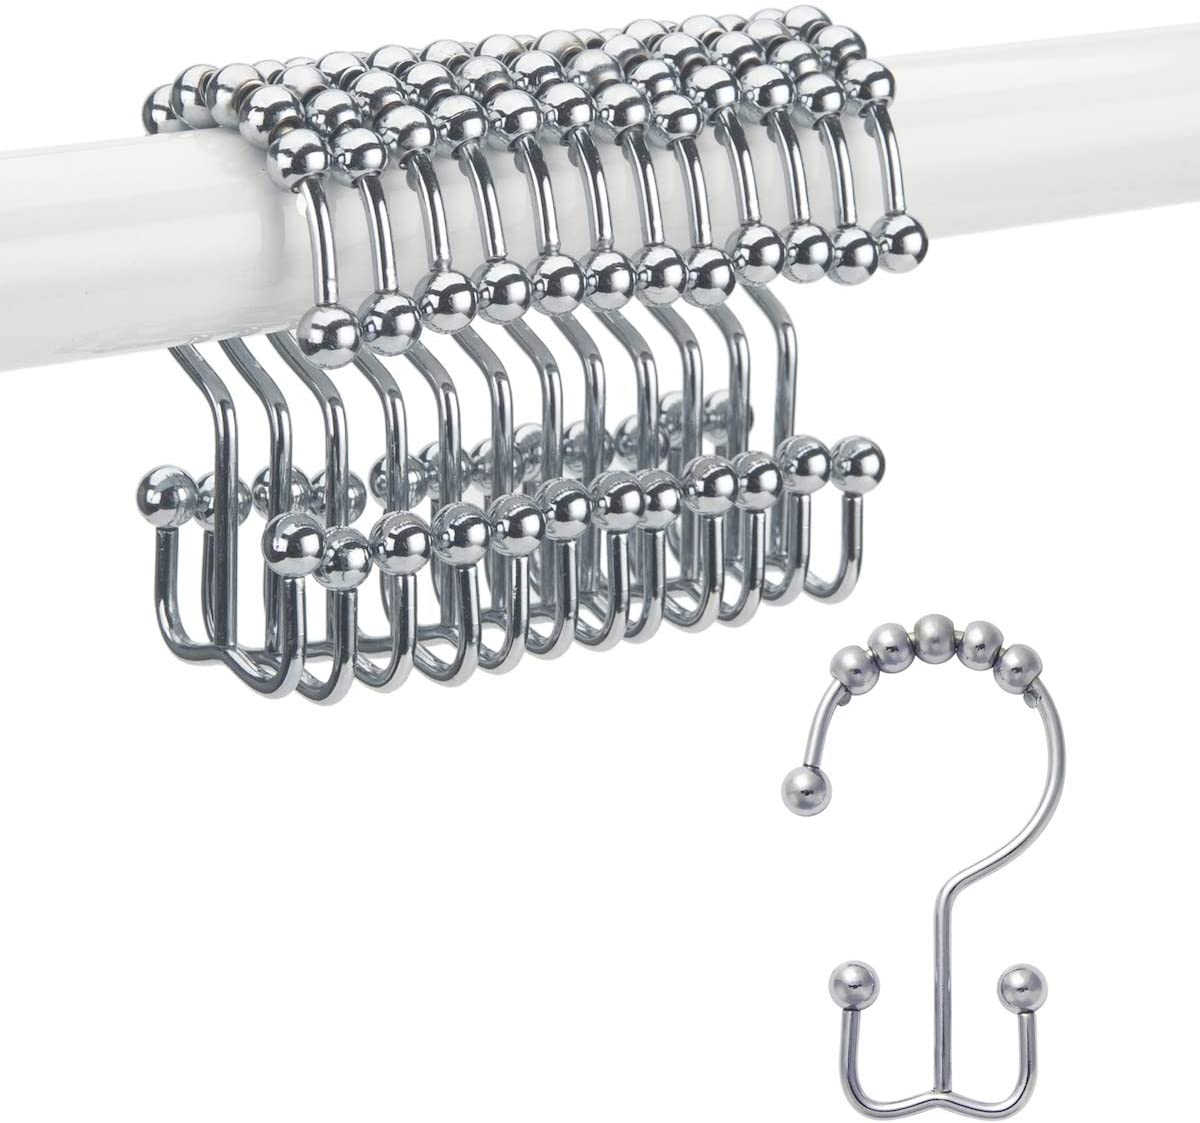 Buy Titanker Shower Curtain Hooks Rings, Rust-Resistant Metal Double Glide  Shower Hooks for Bathroom Shower Rods Curtains, Set of 12 Hooks - Chrome  Online at Low Prices in India - Amazon.in